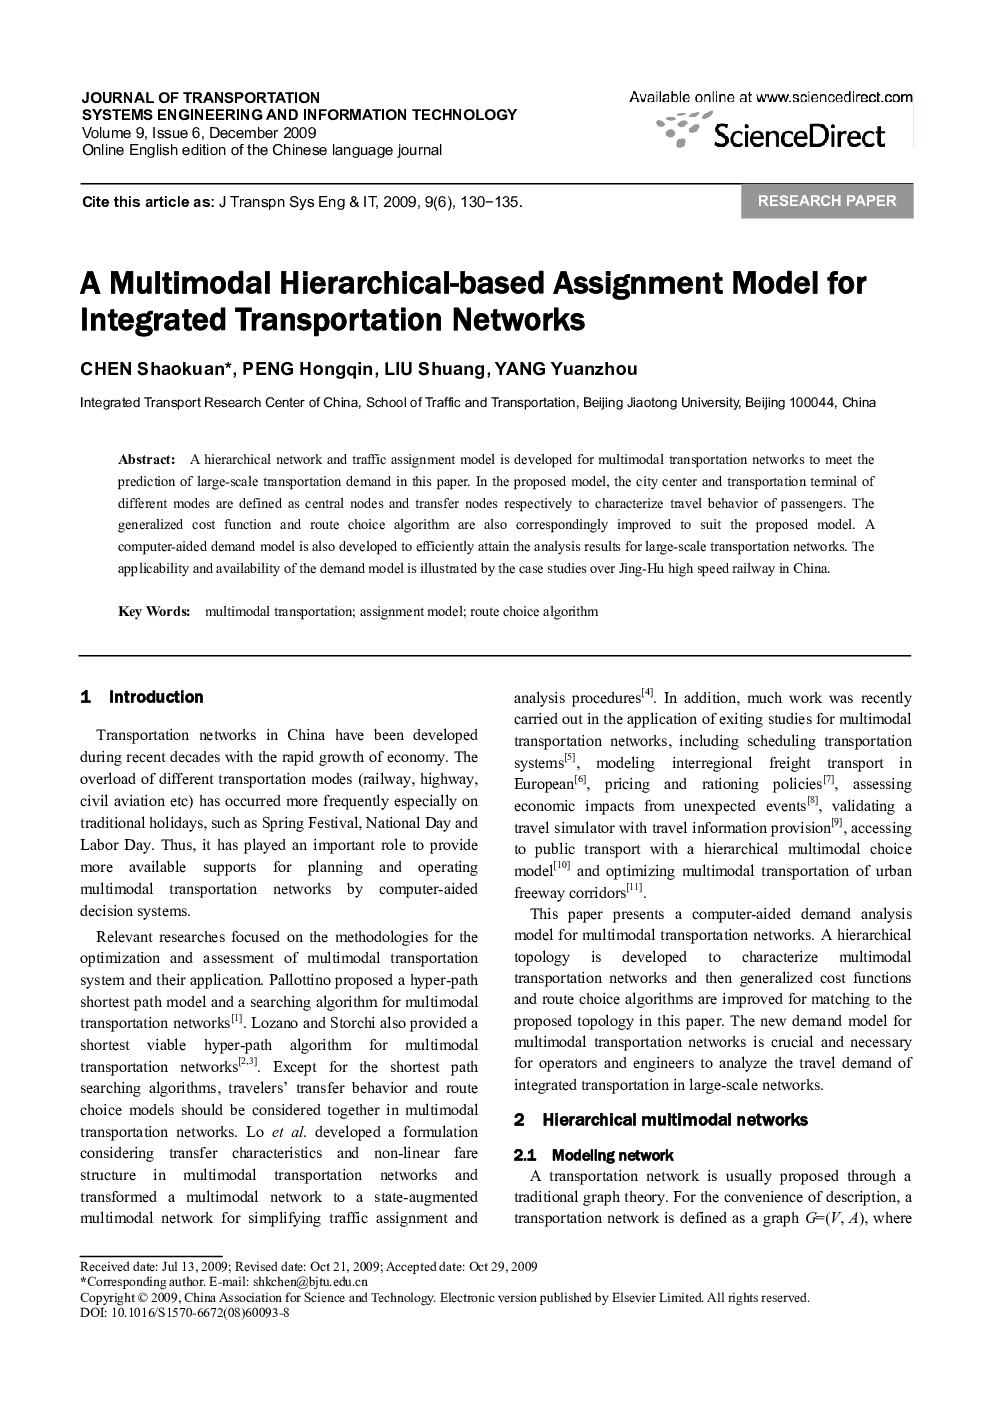 A Multimodal Hierarchical-based Assignment Model for Integrated Transportation Networks